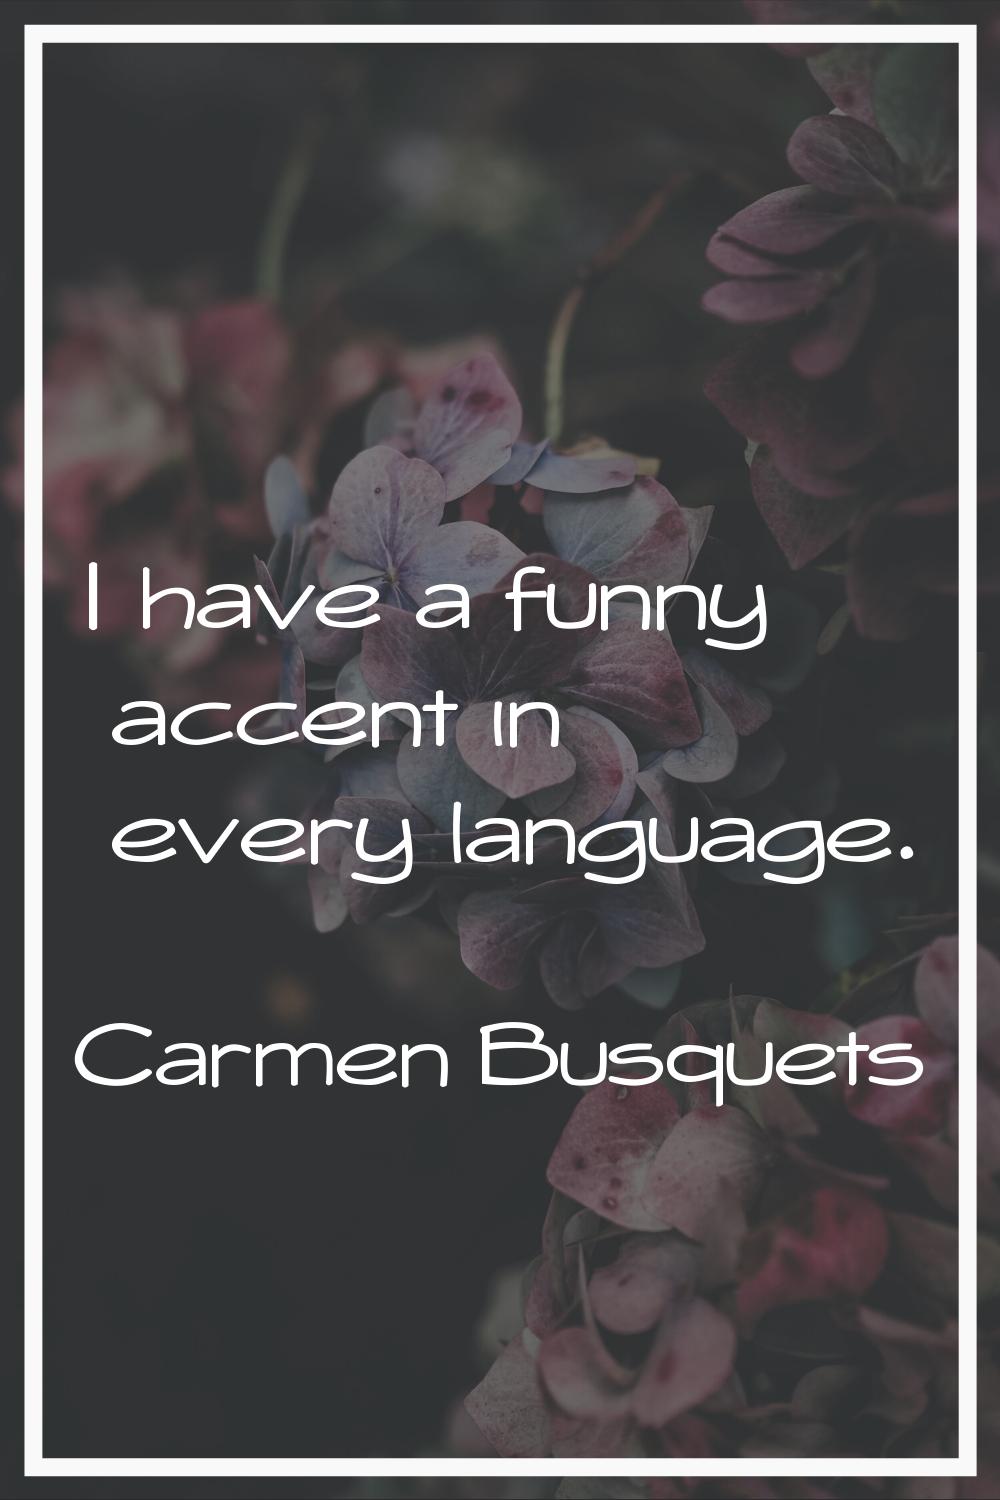 I have a funny accent in every language.